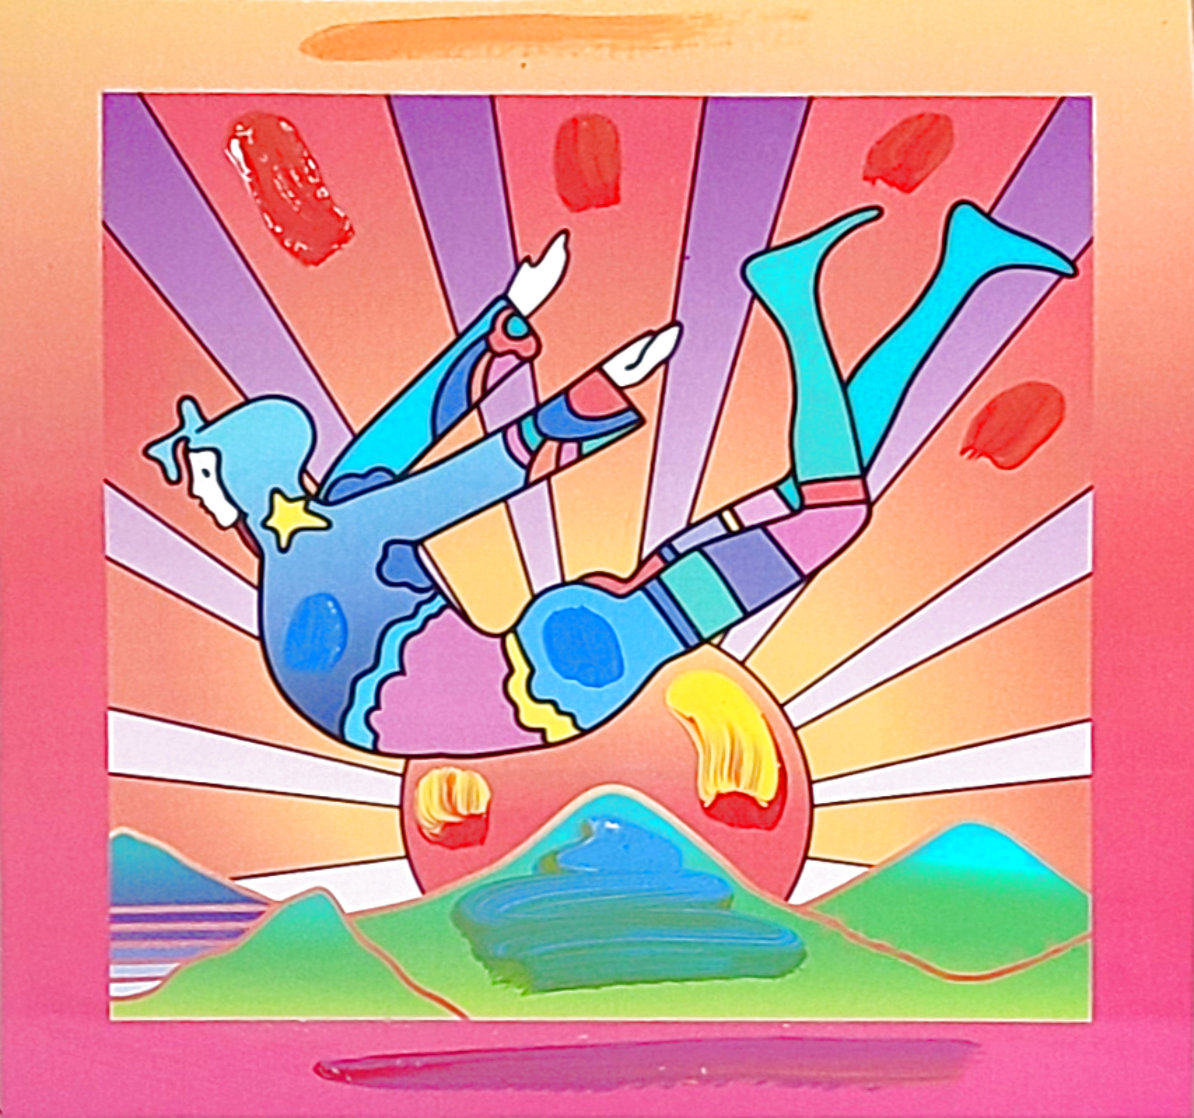 Cosmic Jumper Unique 2005 30x26 Works on Paper (not prints) by Peter Max